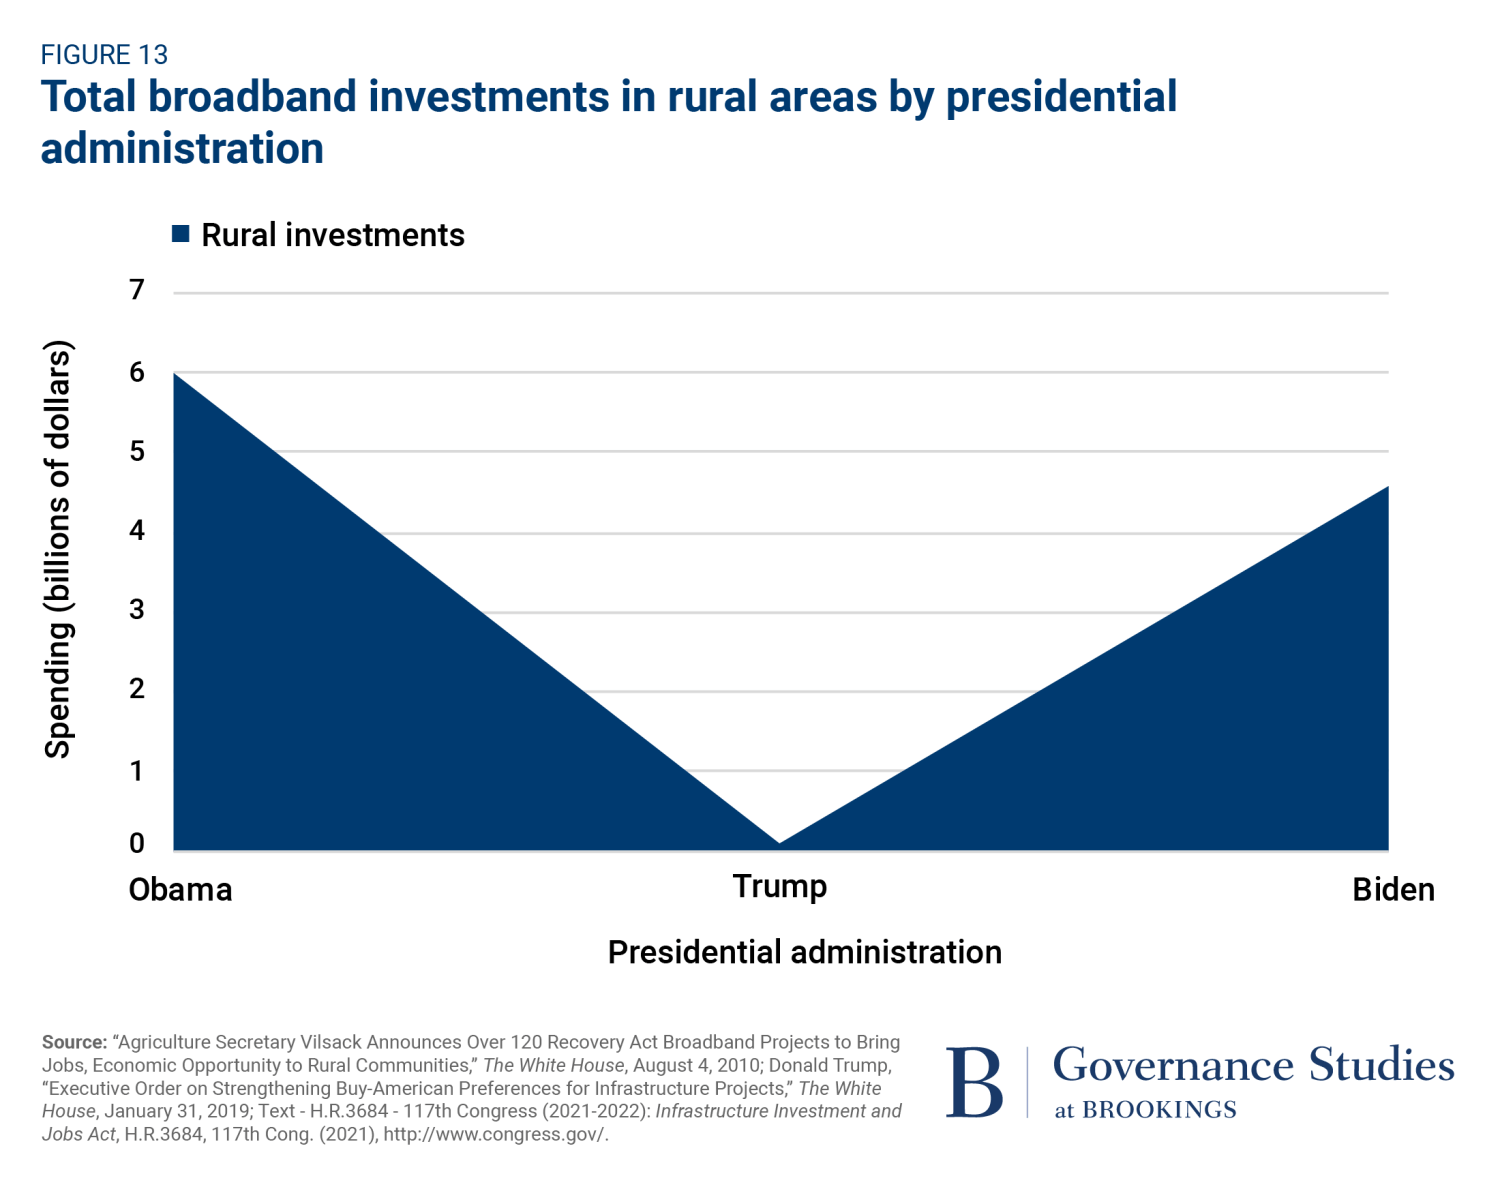 Total Broadband Investments in Rural Areas by Presidential Administration